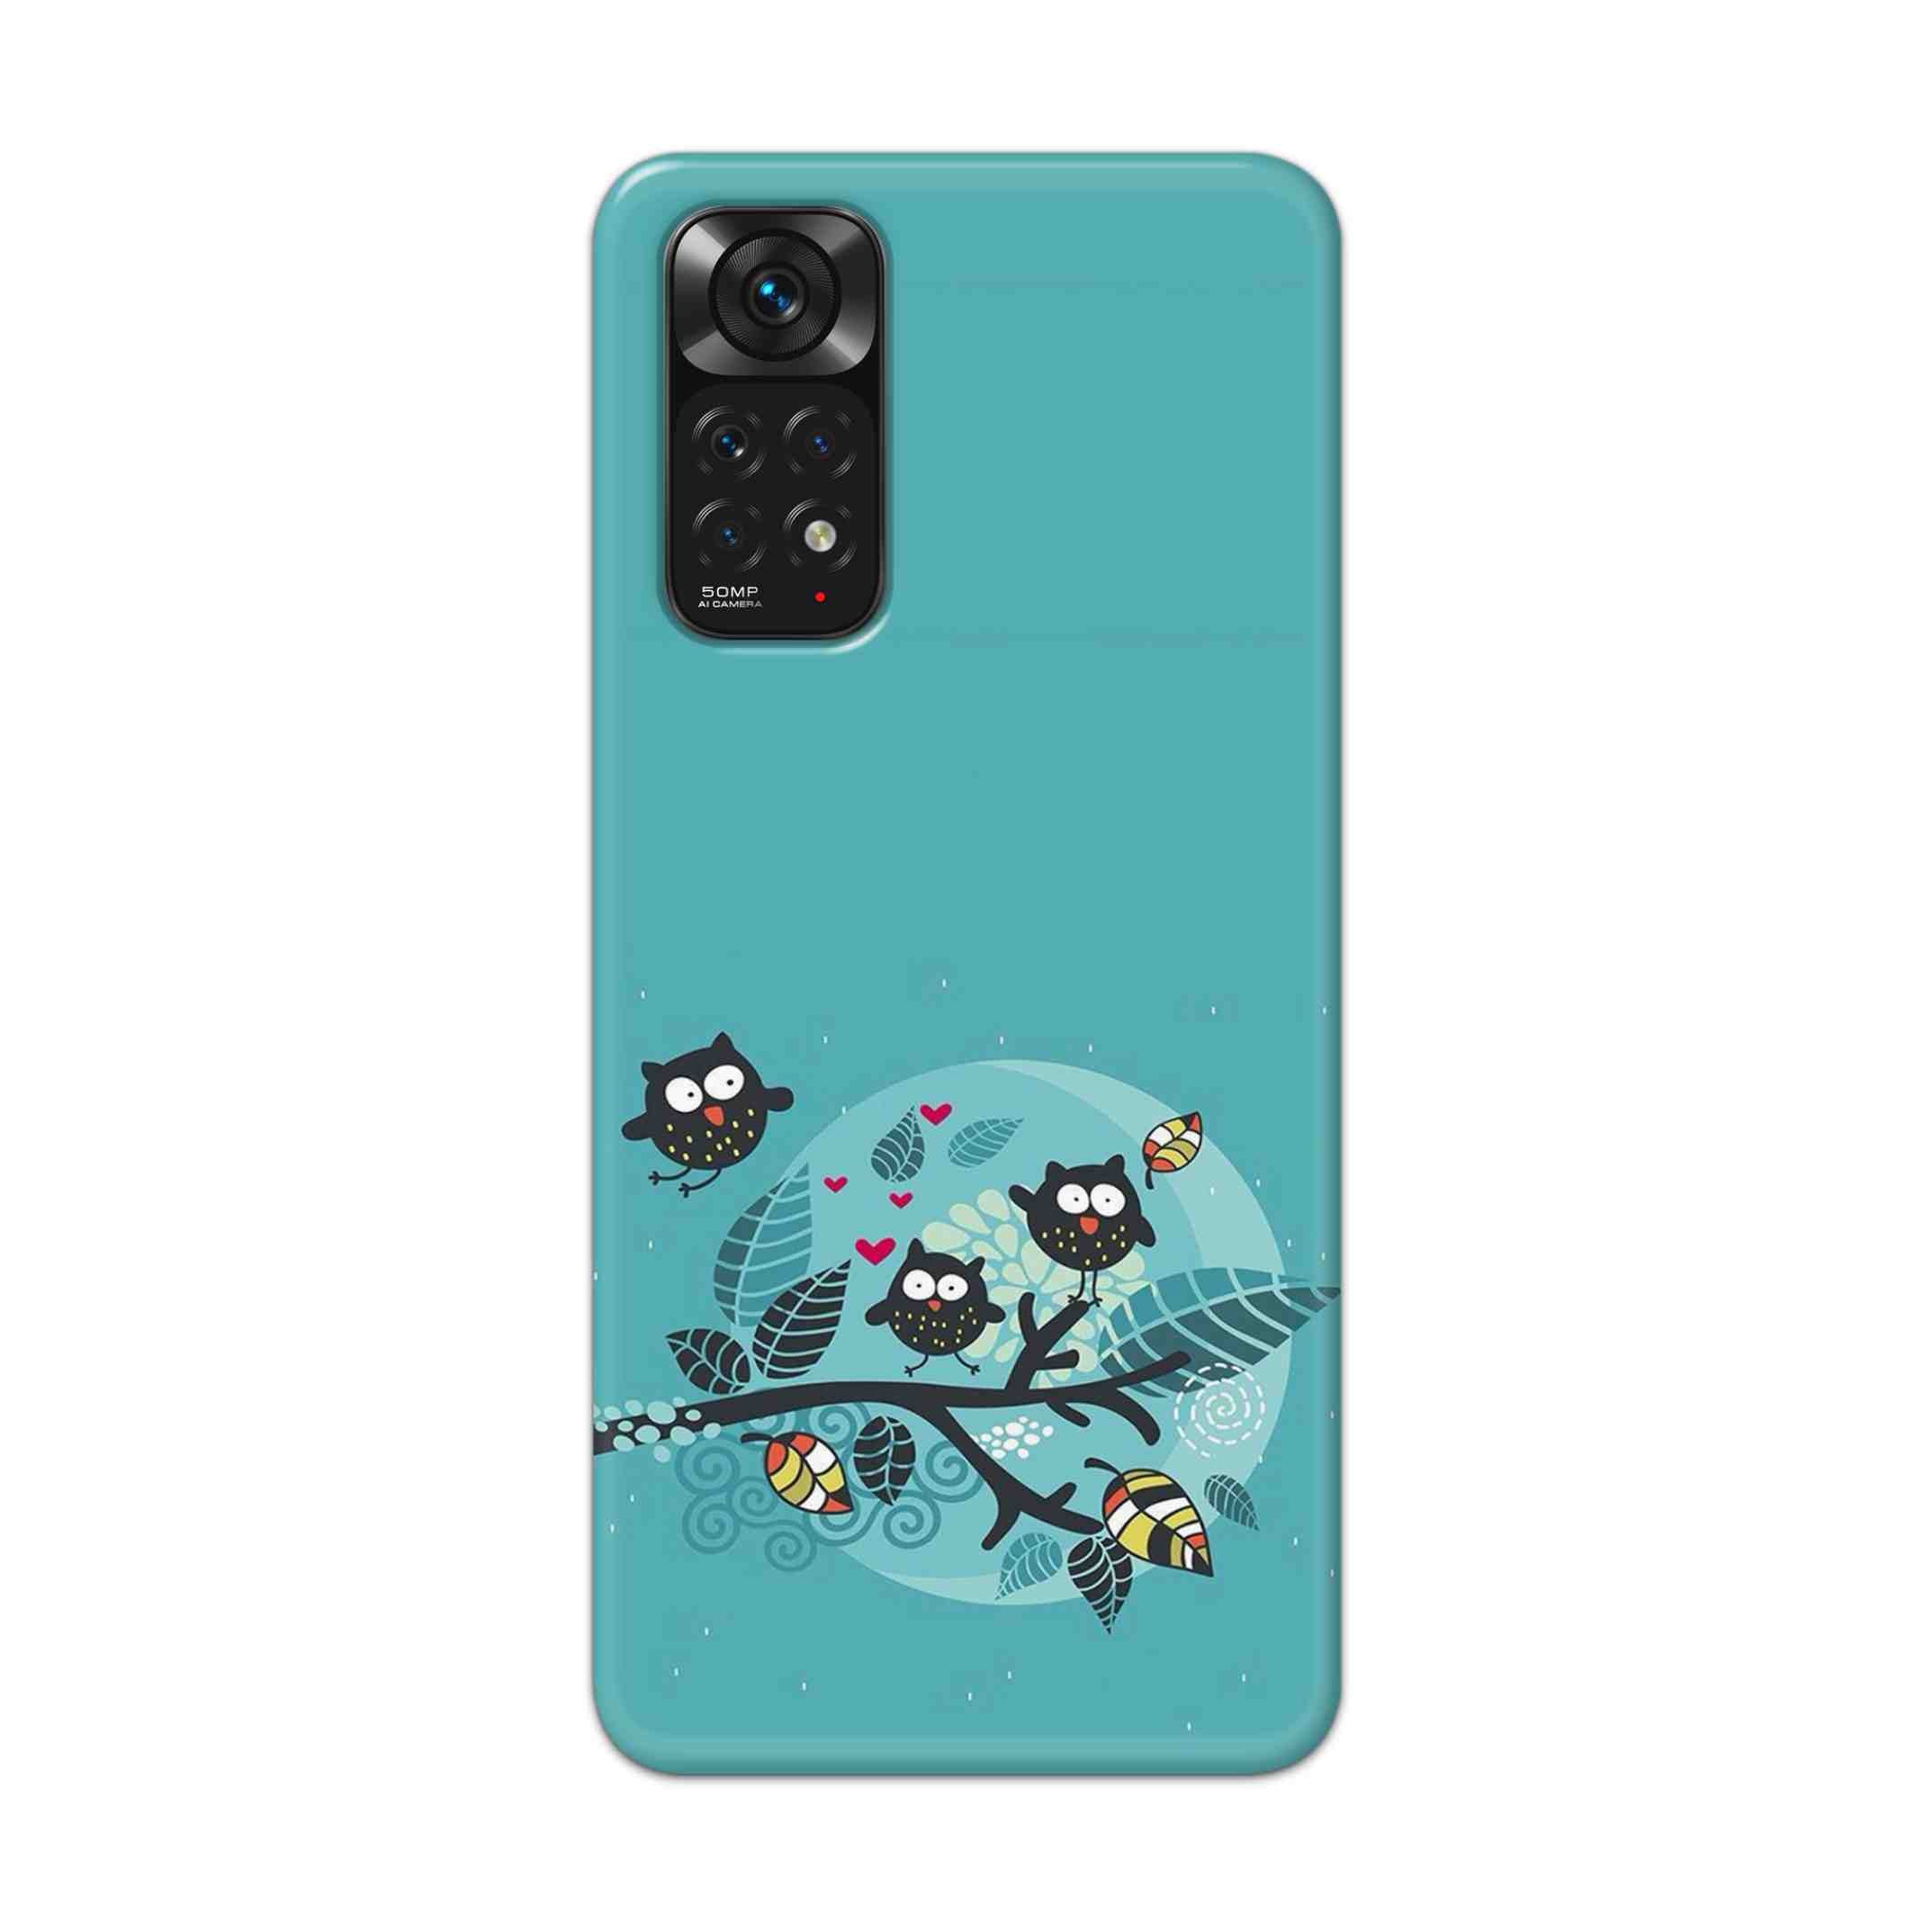 Buy Owl Hard Back Mobile Phone Case Cover For Redmi Note 11 Online